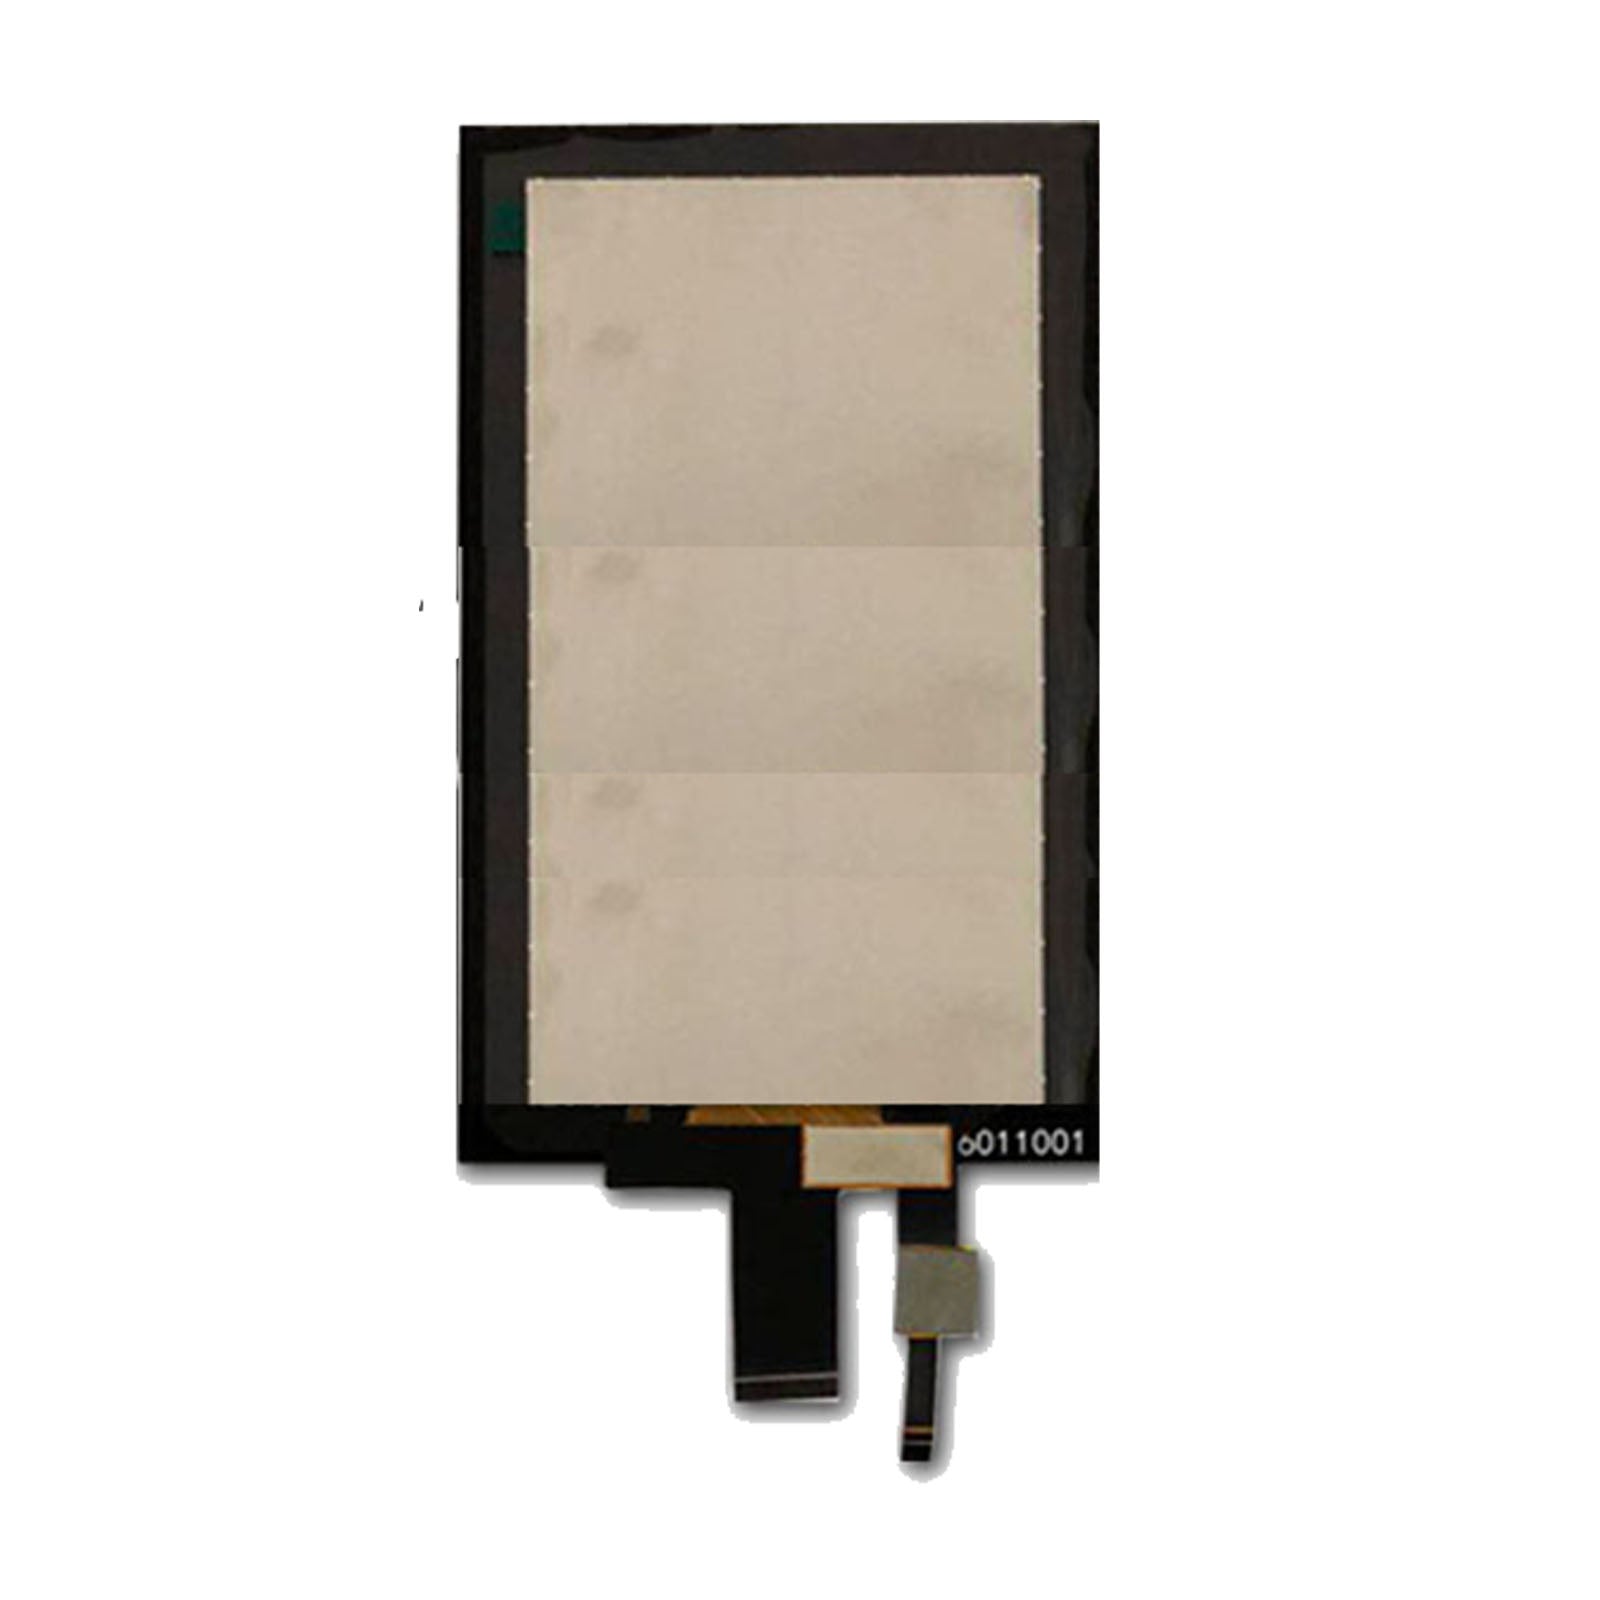 DisplayModule 6.0" IPS 720x1440 Display Panel with Capacitive Touch - MIPI